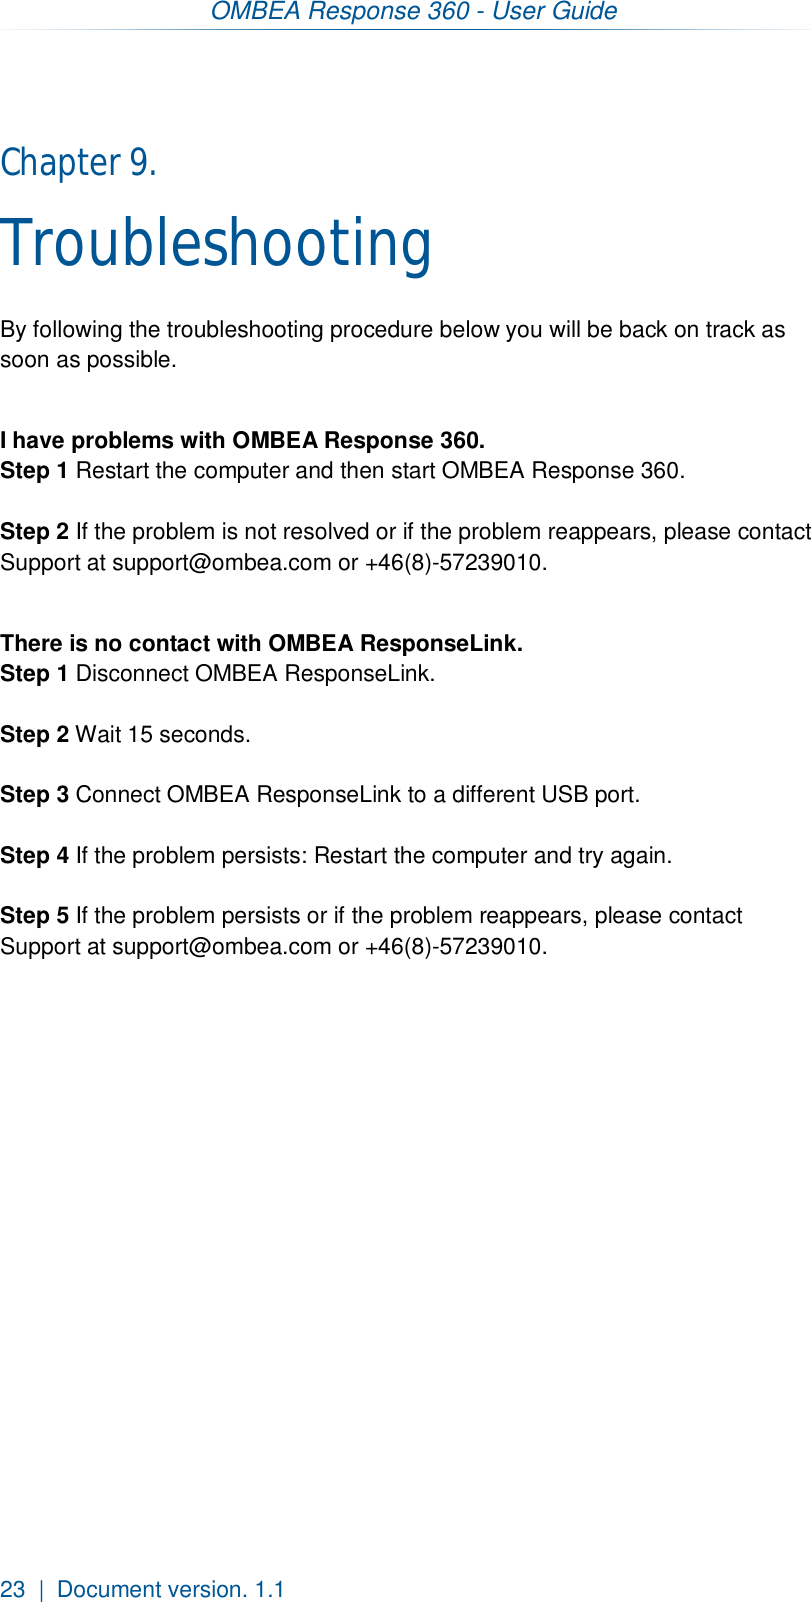 OMBEA Response 360 - User Guide  23  |  Document version. 1.1 Chapter 9.  Troubleshooting By following the troubleshooting procedure below you will be back on track as soon as possible.  I have problems with OMBEA Response 360. Step 1 Restart the computer and then start OMBEA Response 360.  Step 2 If the problem is not resolved or if the problem reappears, please contact Support at support@ombea.com or +46(8)-57239010.   There is no contact with OMBEA ResponseLink. Step 1 Disconnect OMBEA ResponseLink.  Step 2 Wait 15 seconds.  Step 3 Connect OMBEA ResponseLink to a different USB port.  Step 4 If the problem persists: Restart the computer and try again.  Step 5 If the problem persists or if the problem reappears, please contact Support at support@ombea.com or +46(8)-57239010.   